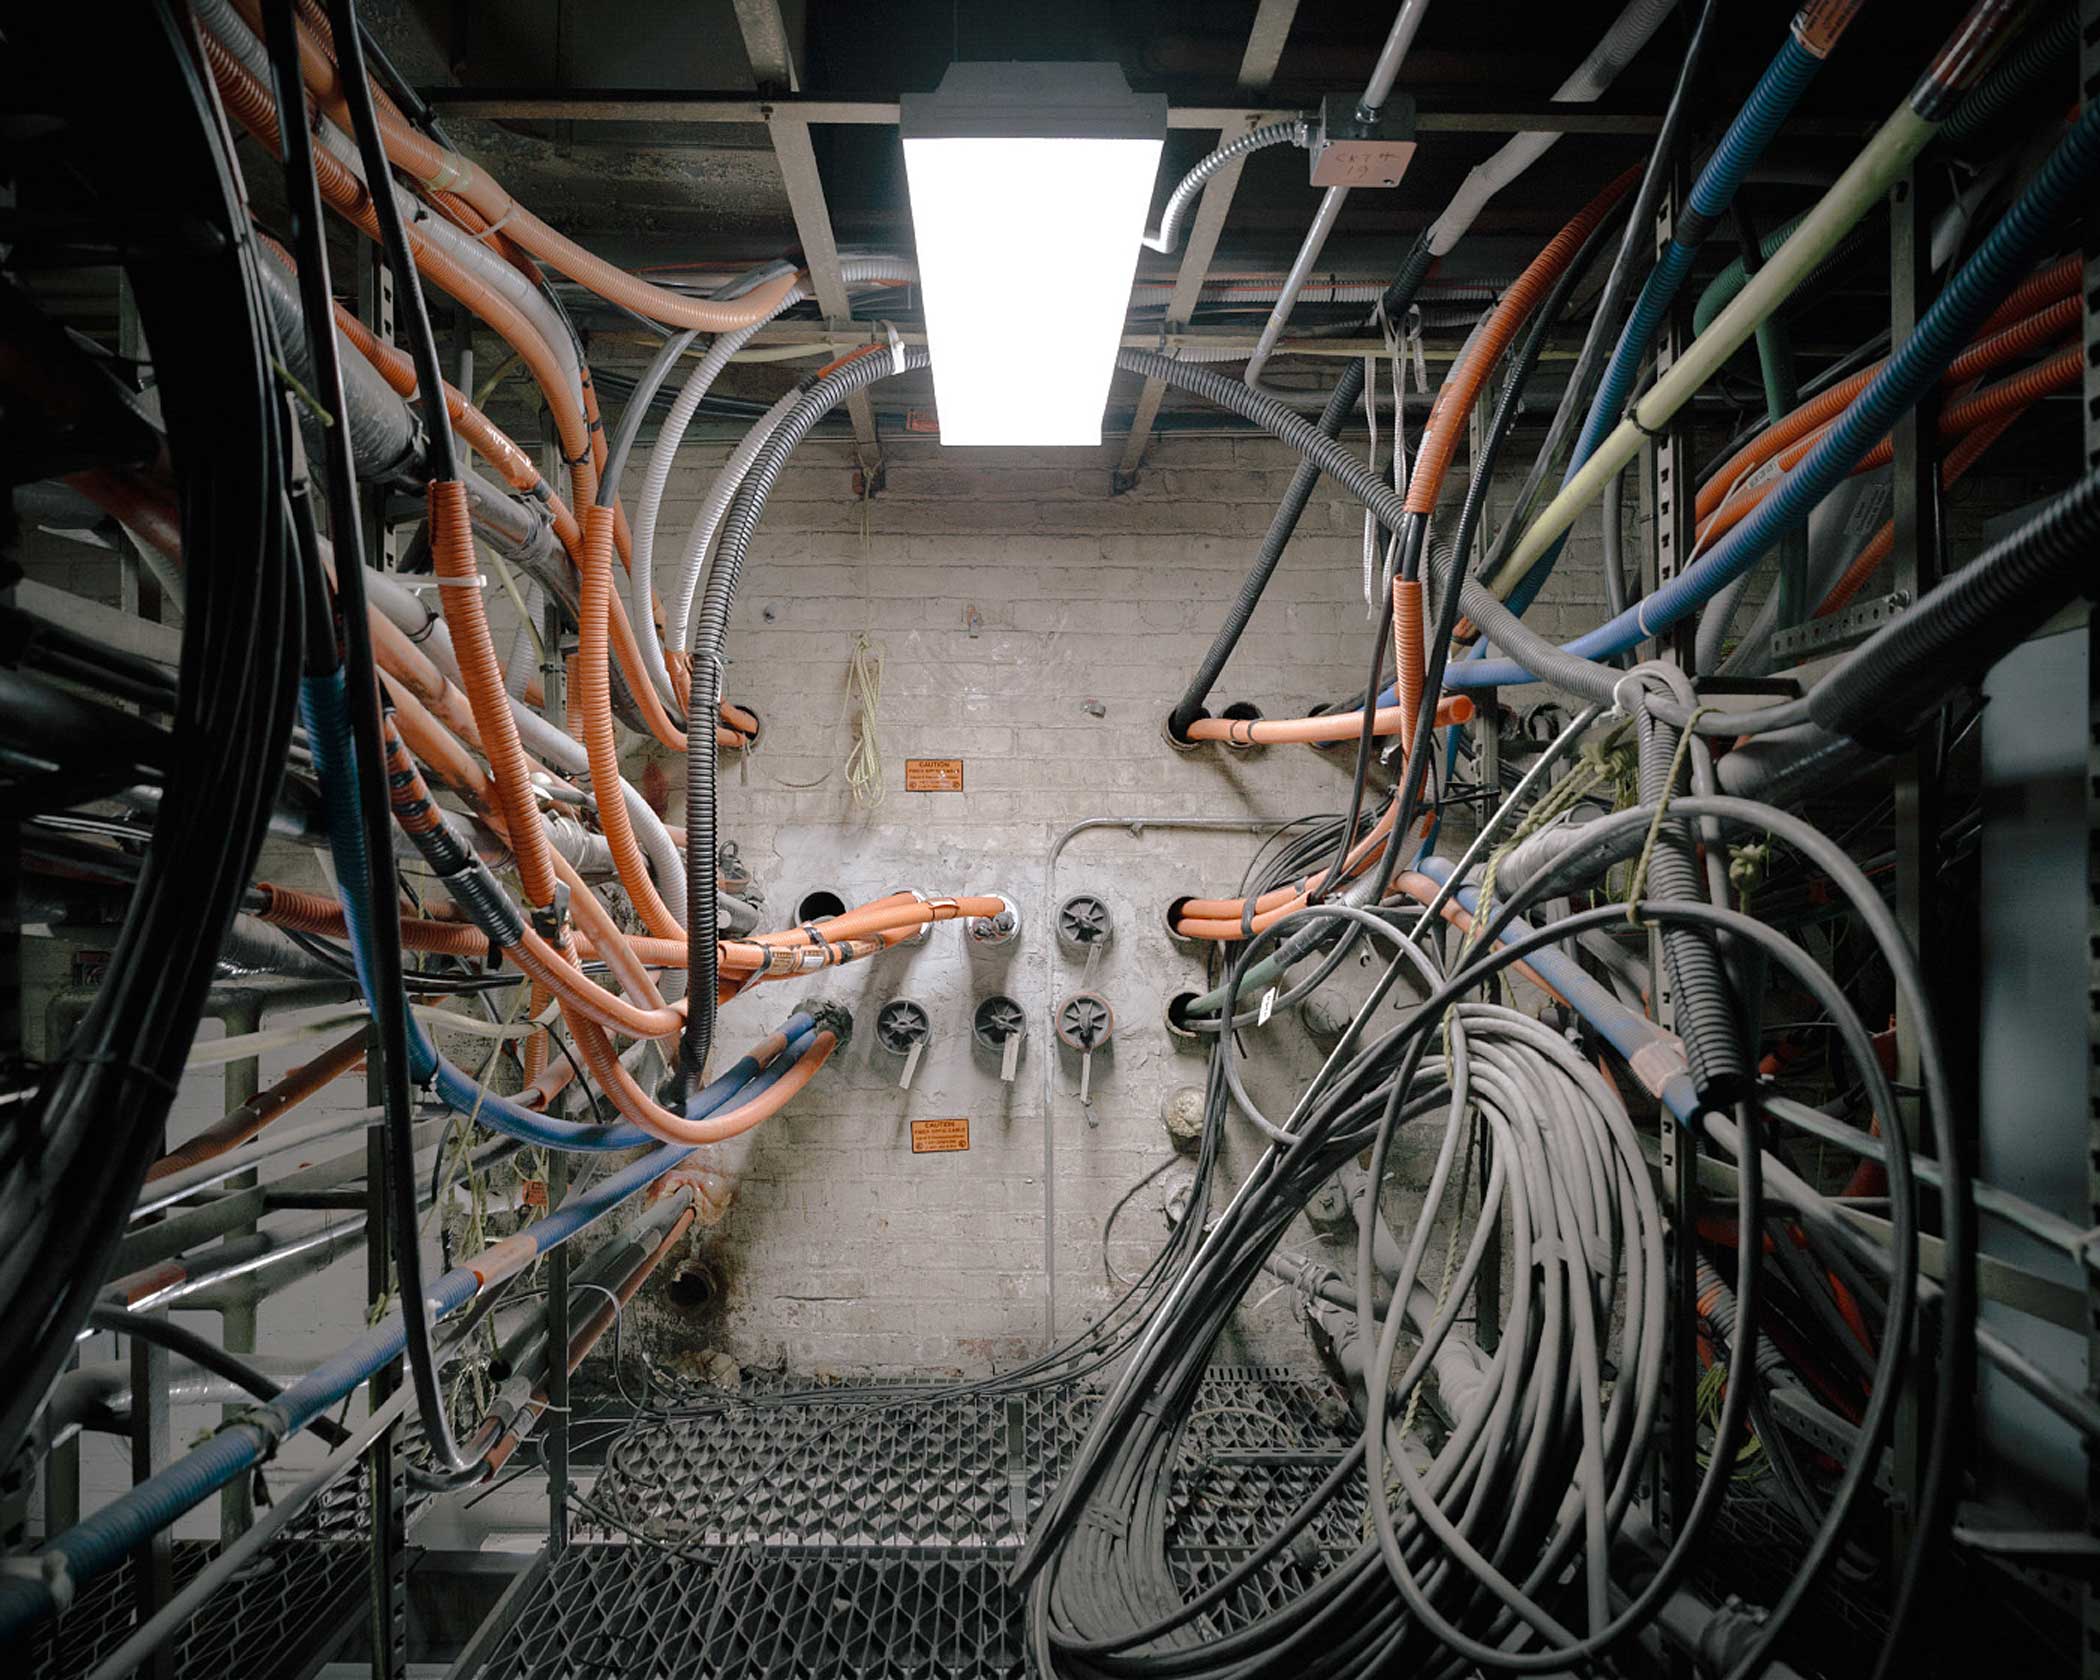 Fiber optic cables enter and exit carrier hotels through underground vaults. Some of these cables run local connections, others are on their way to eventually cross the Atlantic via landing stations in New York and New Jersey. Various networks and service providers pay for access to carrier hotels through the the conduit in these fiber vaults.